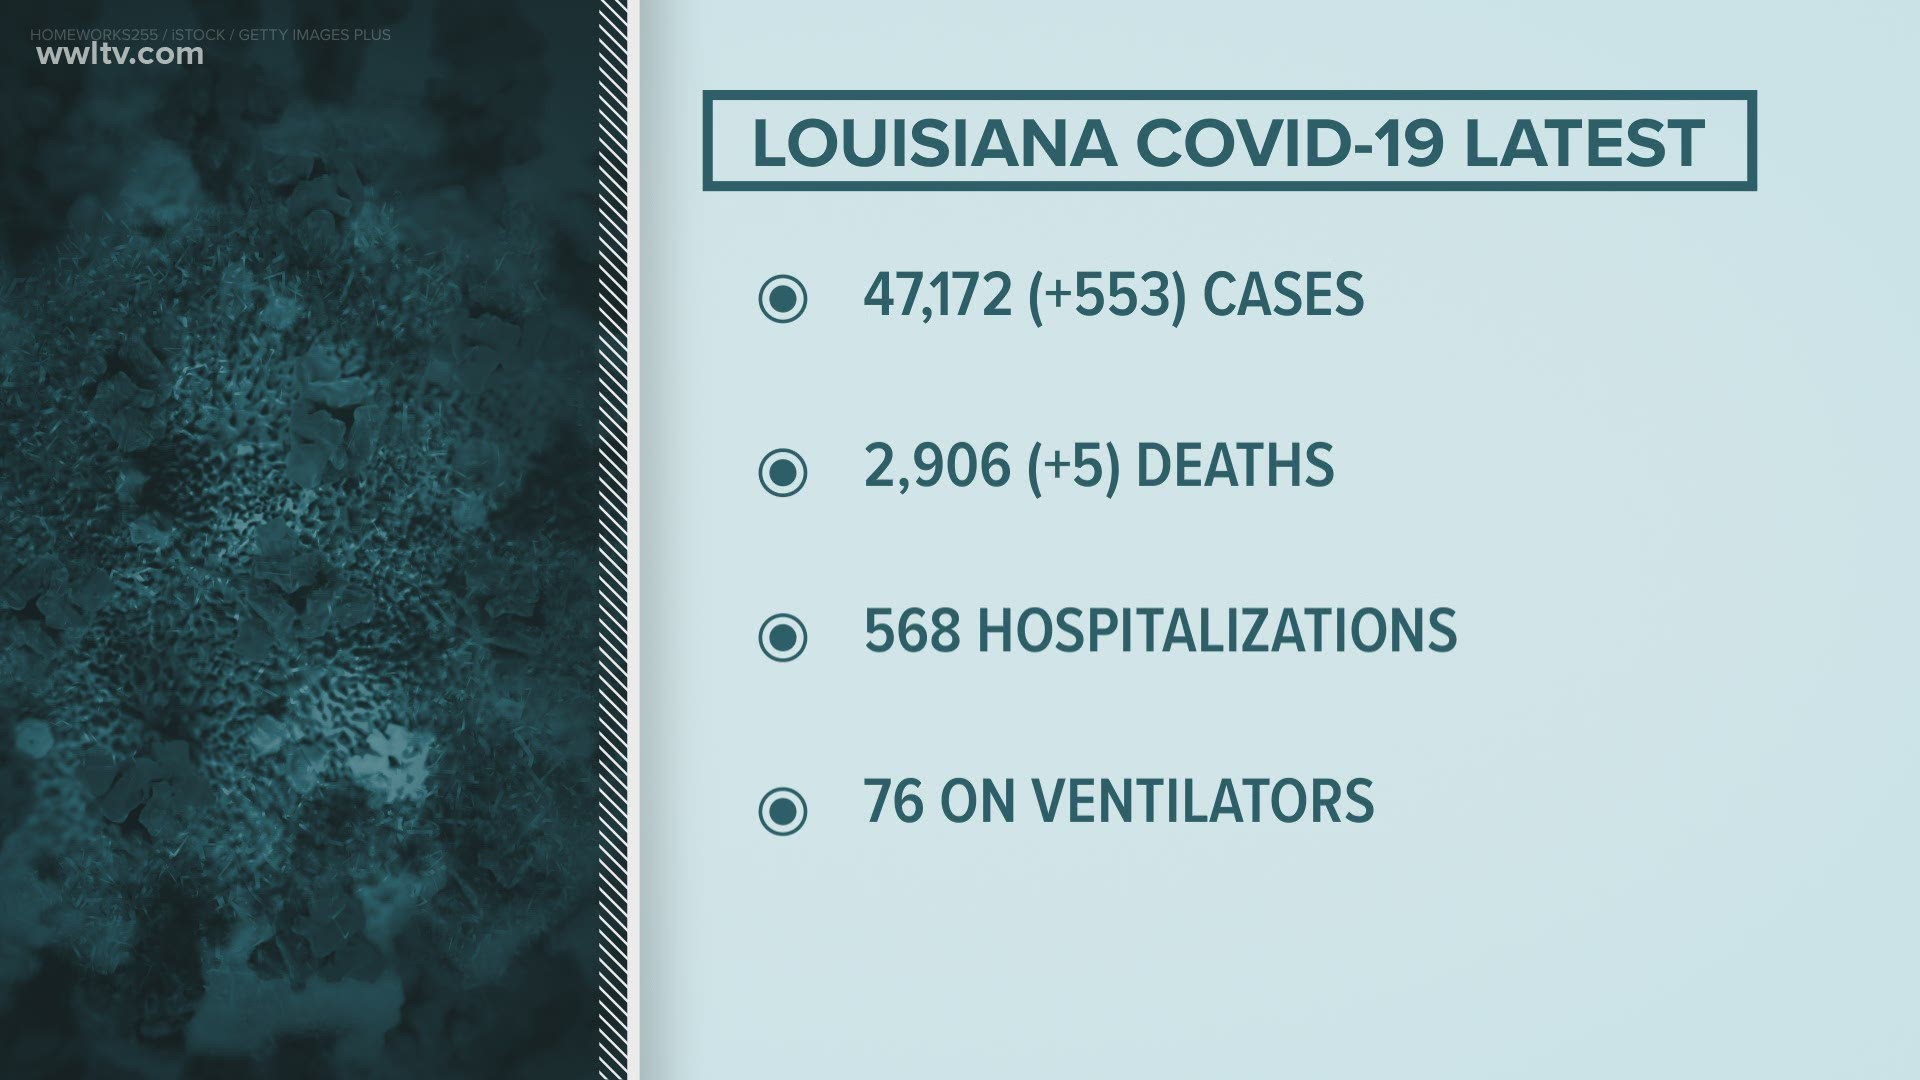 After weeks of improvements, COVID-19 cases and hospitalizations have increased for the second day straight in Louisiana.